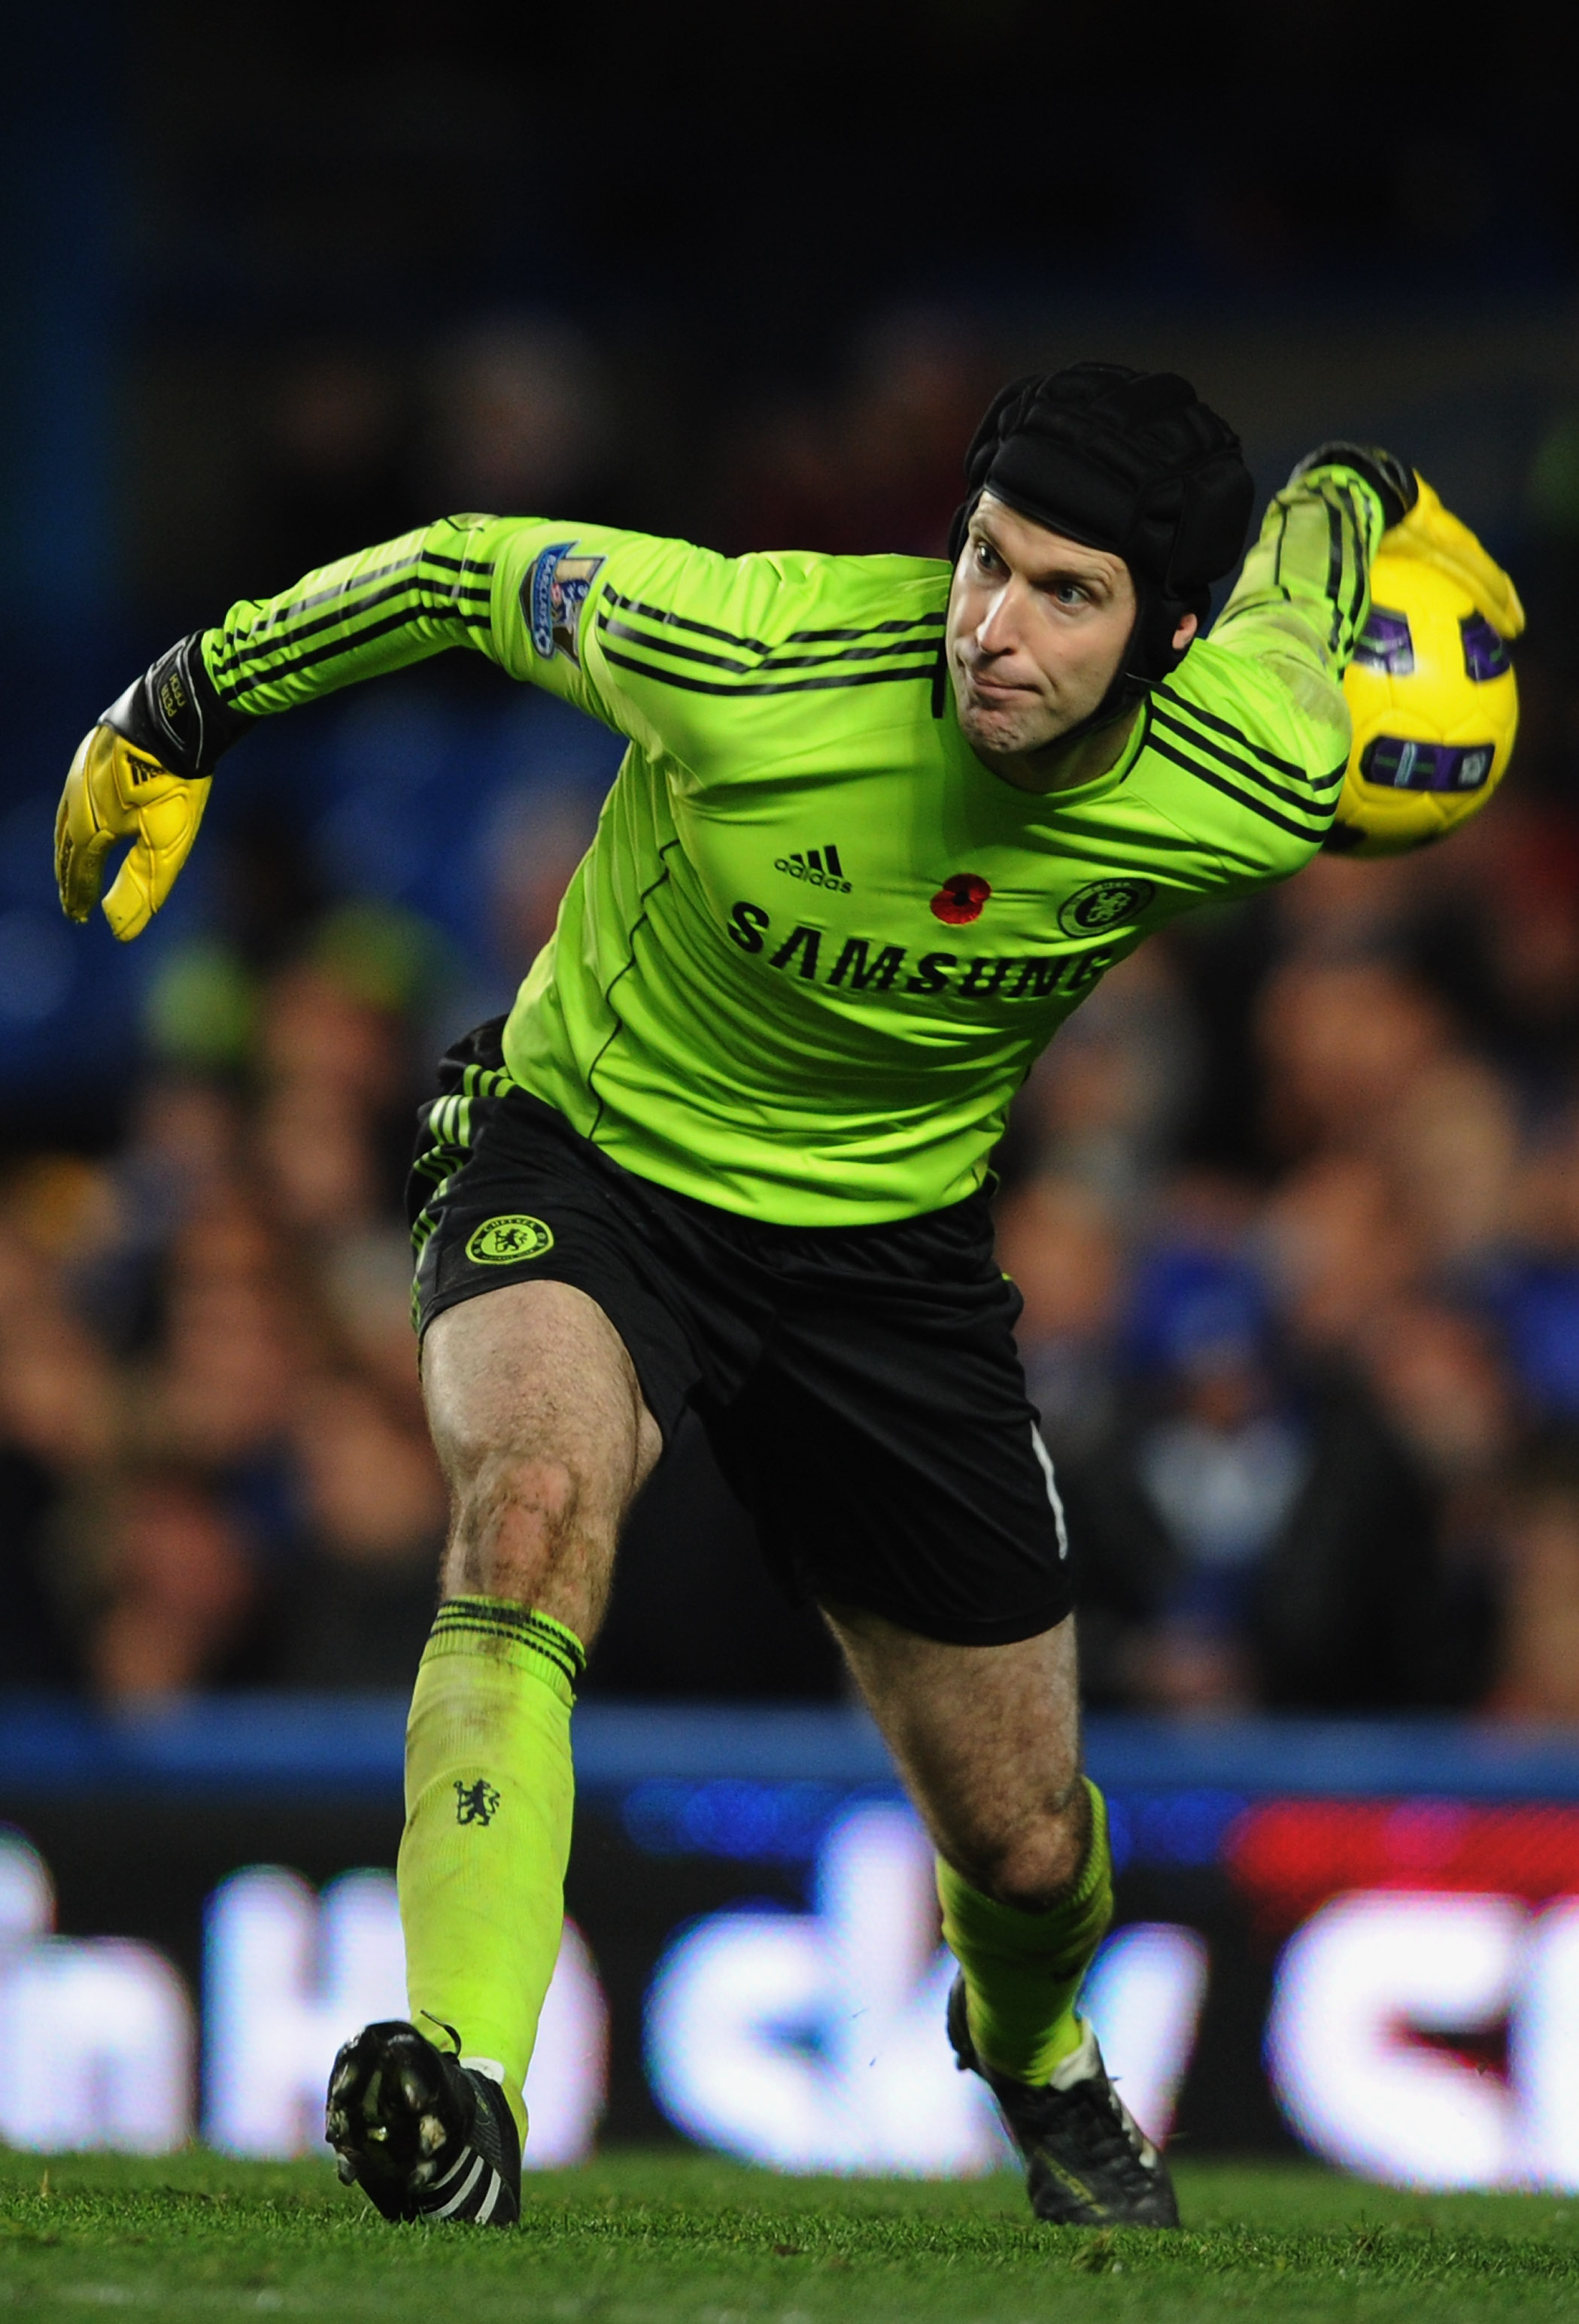 LONDON, ENGLAND - NOVEMBER 14:  Petr Cech of Chelsea in action during the Barclays Premier League match between Chelsea and Sunderland at Stamford Bridge on November 14, 2010 in London, England.  (Photo by Michael Regan/Getty Images)